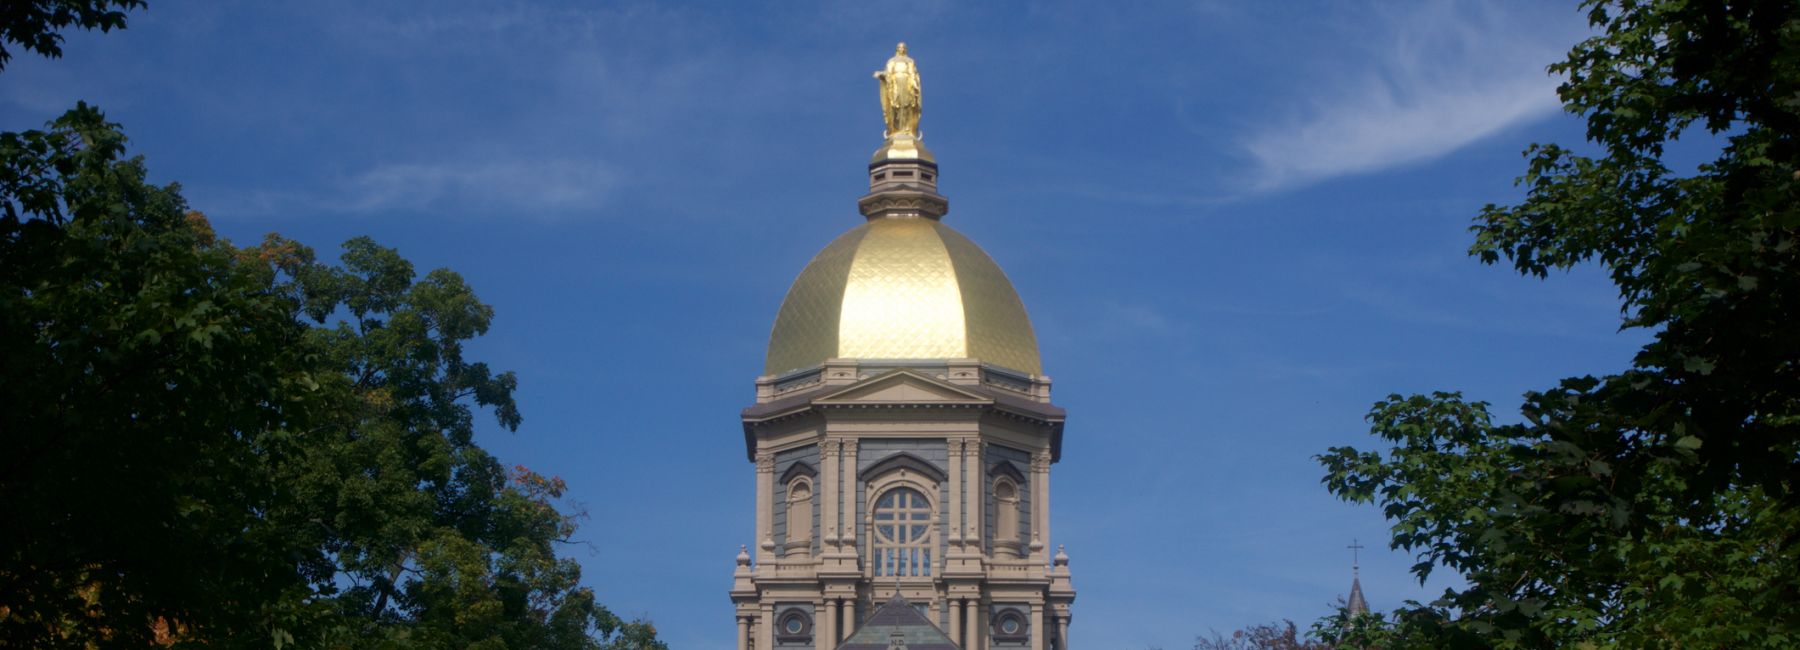 University of Notre Dame Main Building (The Golden Dome)